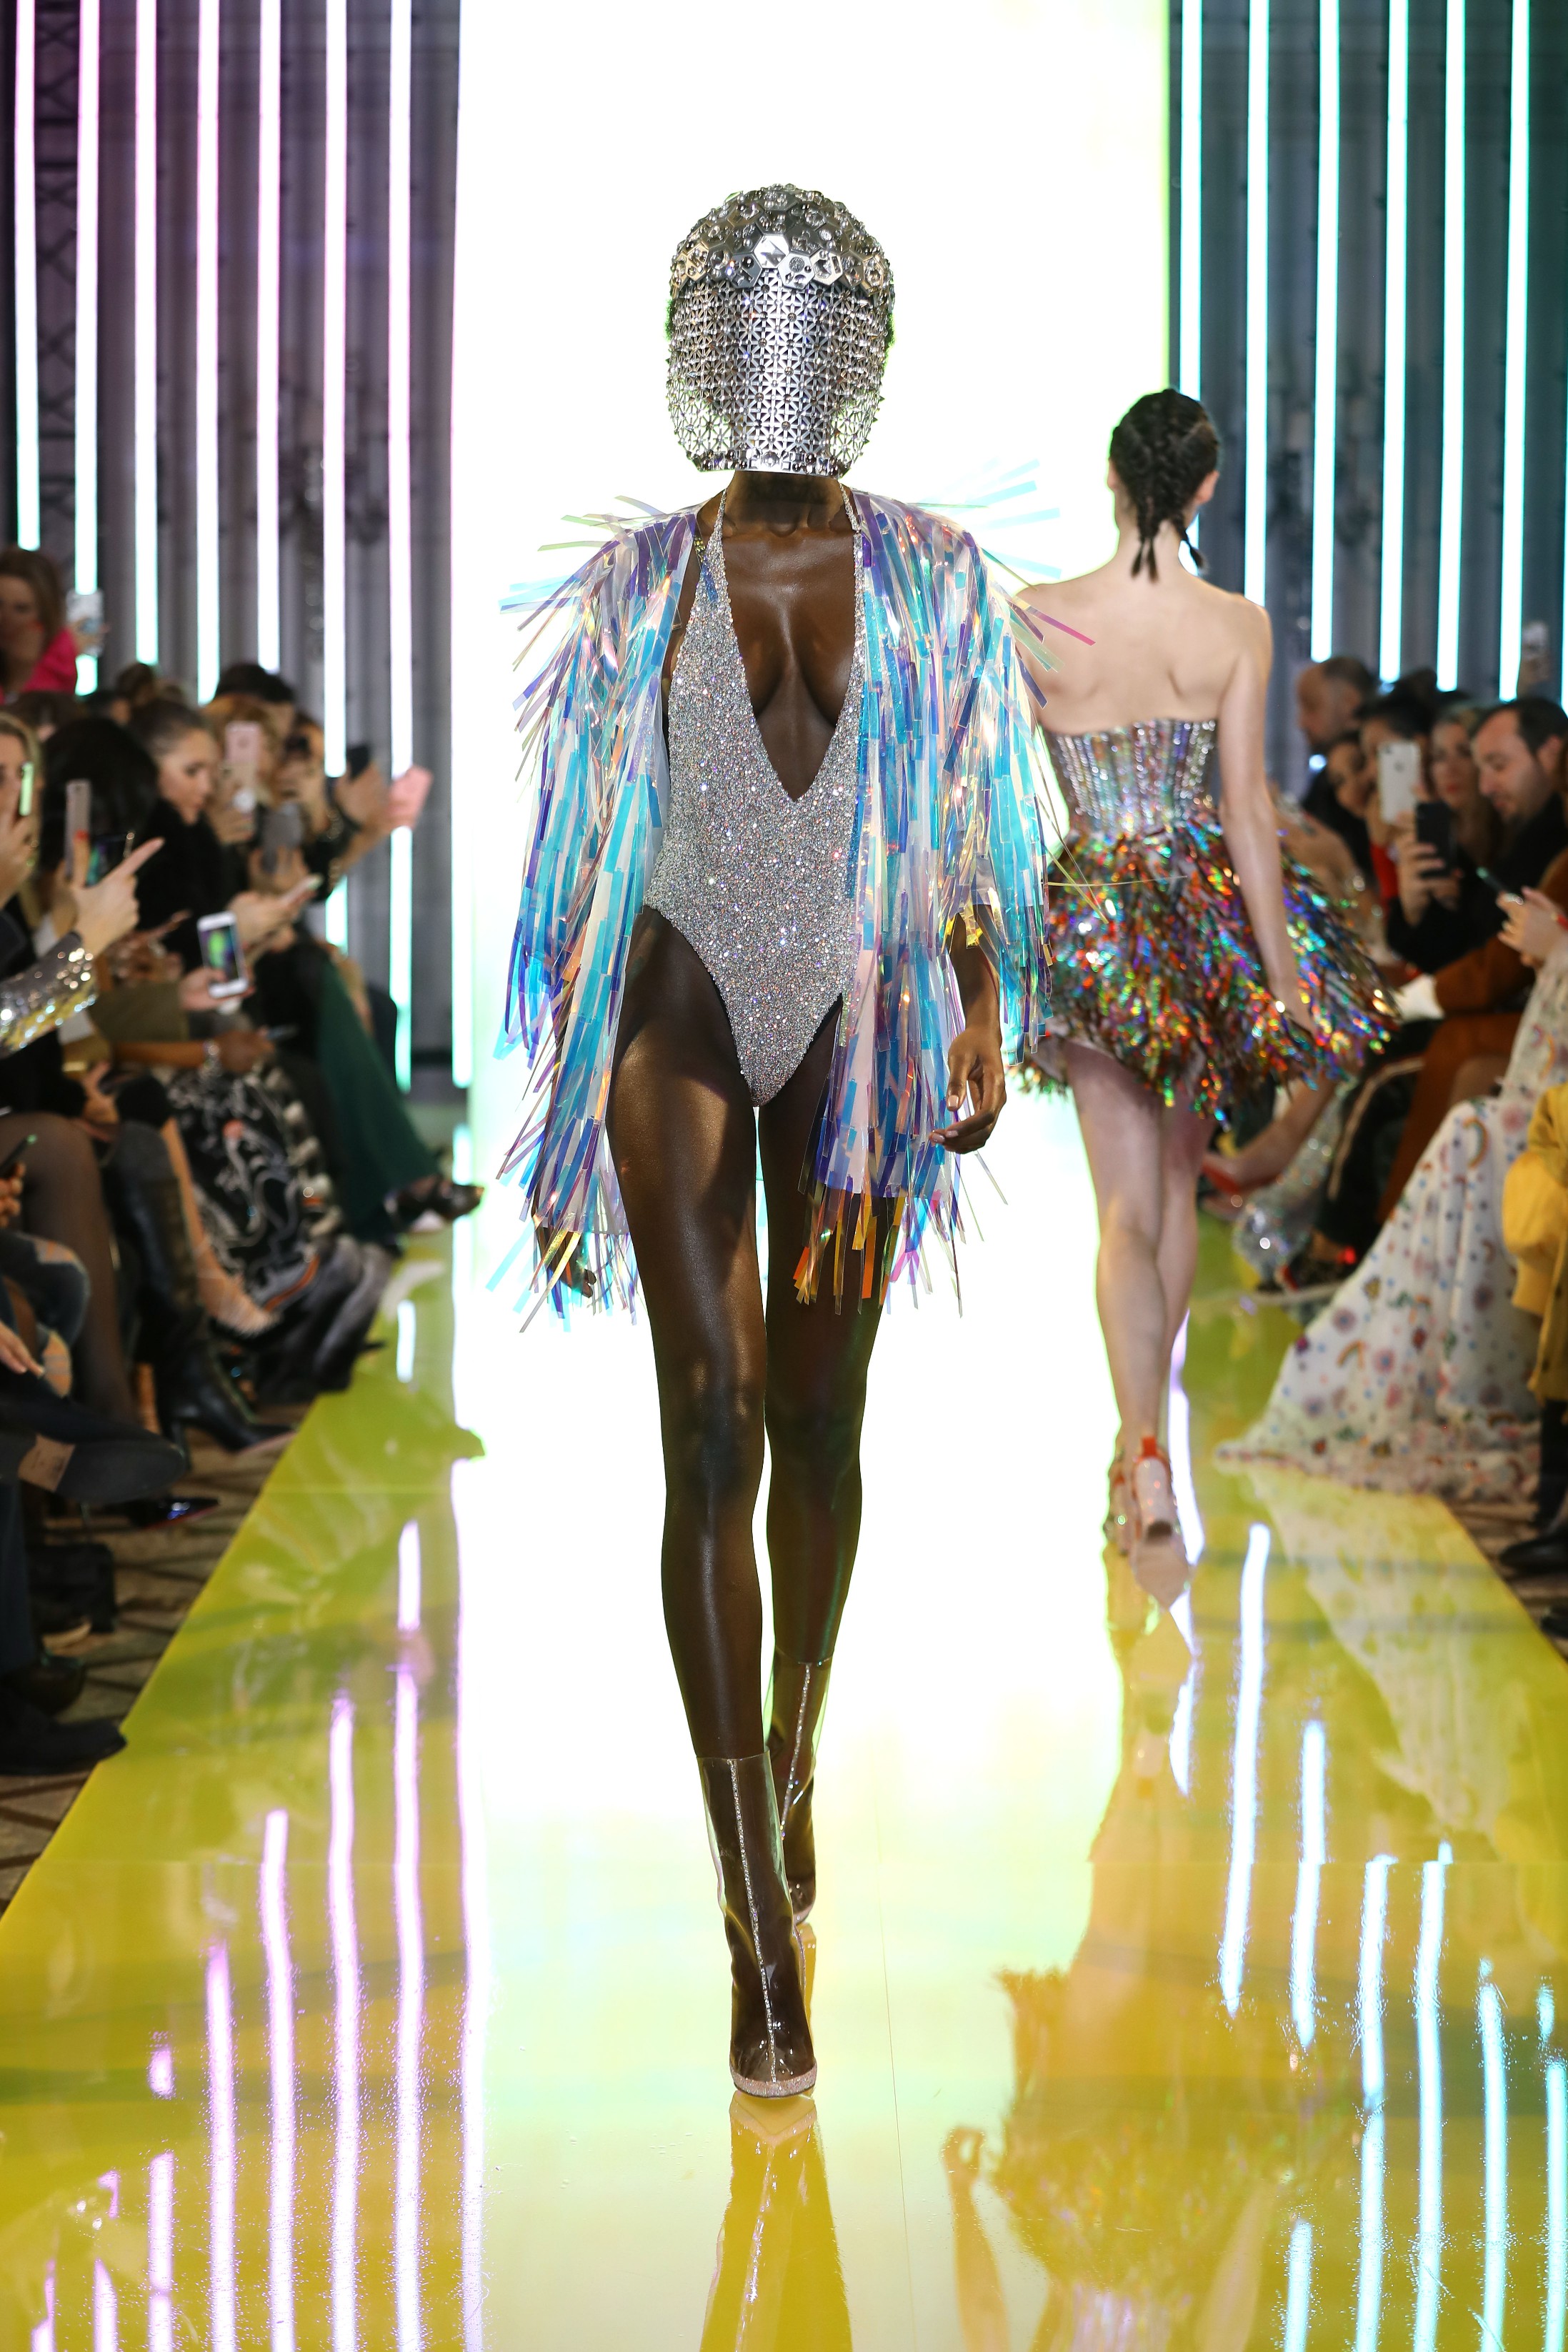 SS19-2 Holographic Crystals Fully Embellished Ensemble Paired With A Laser-Cut Iridescent Sequins Fringed Jacket .jpg